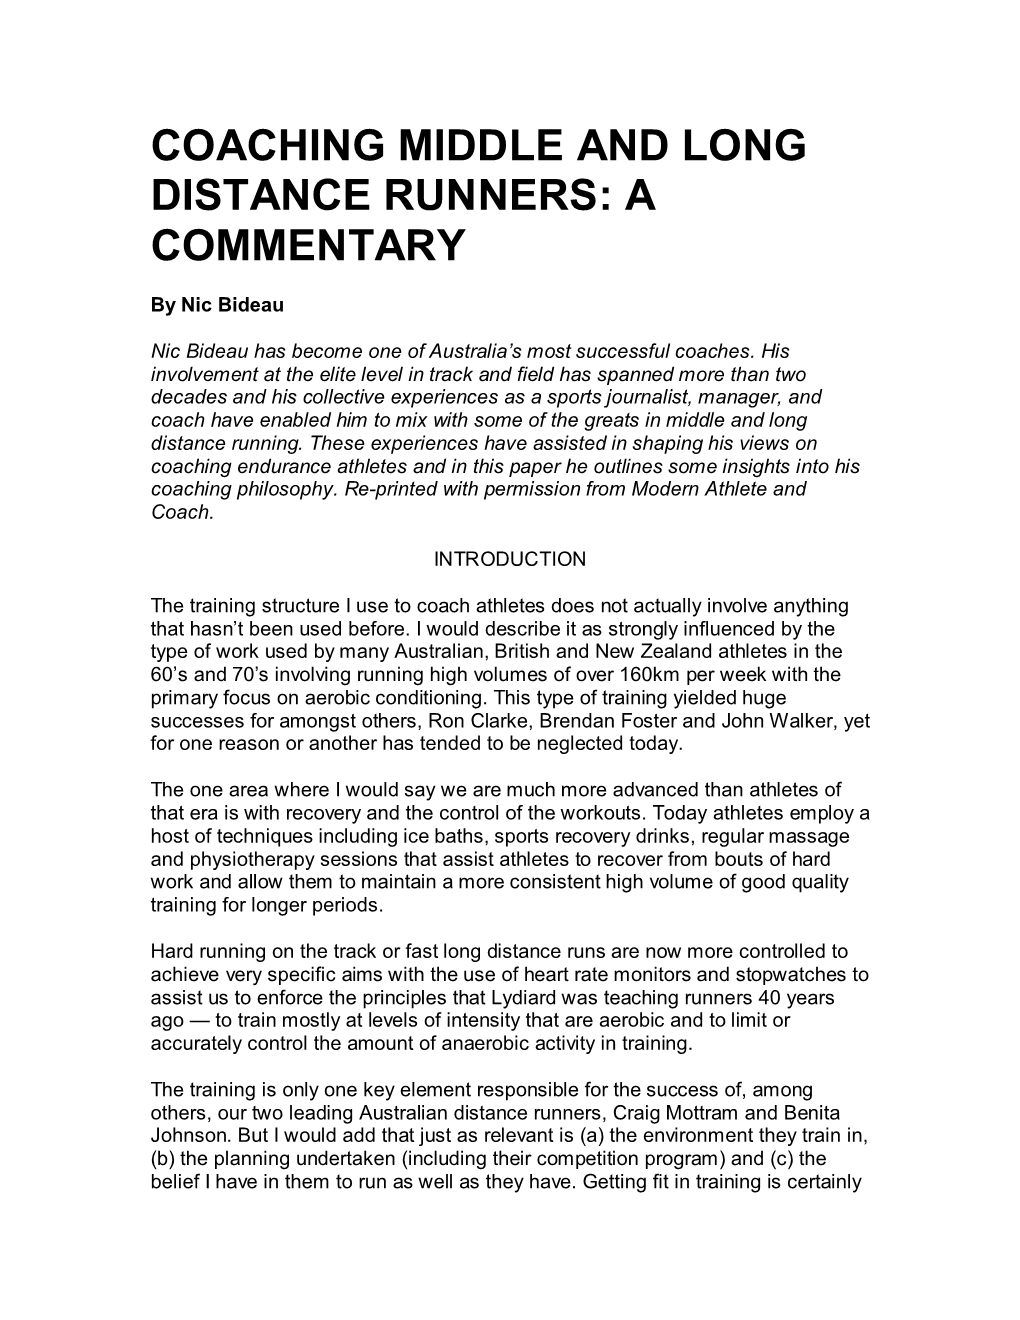 Coaching Middle and Long Distance Runners: a Commentary